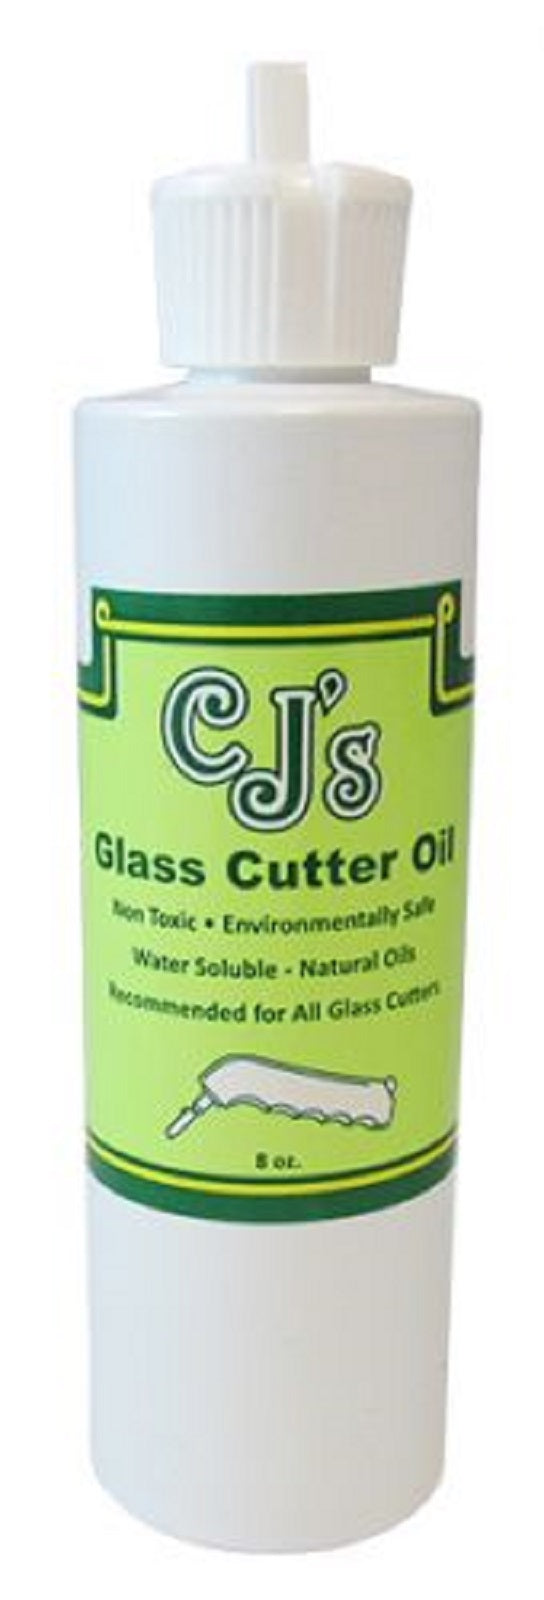 CJ's 8oz. Glass Cutting Oil - Made for All Oil Fed and Dry Wheel Cutters - Makes